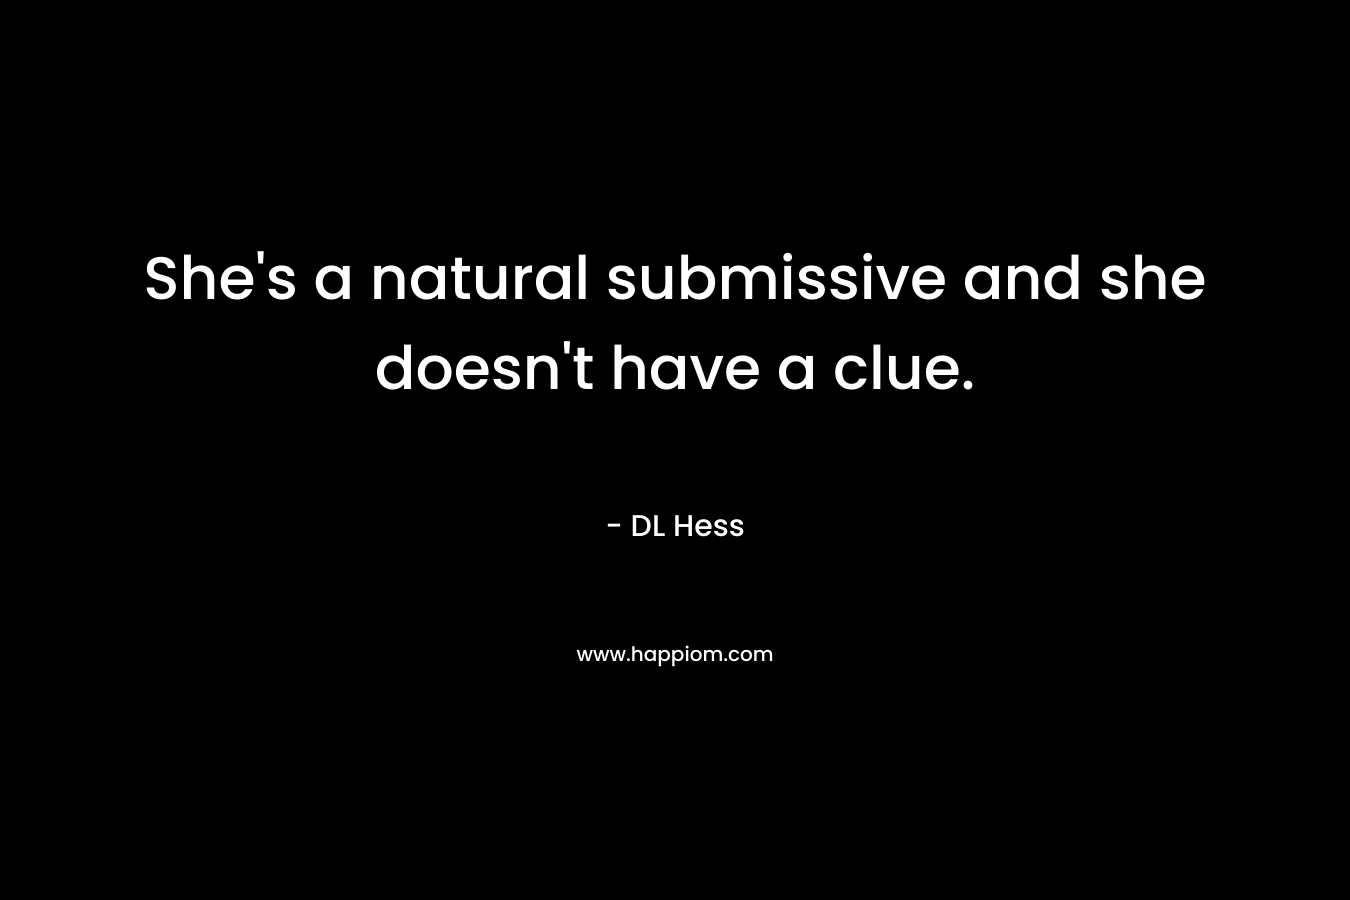 She’s a natural submissive and she doesn’t have a clue. – DL Hess